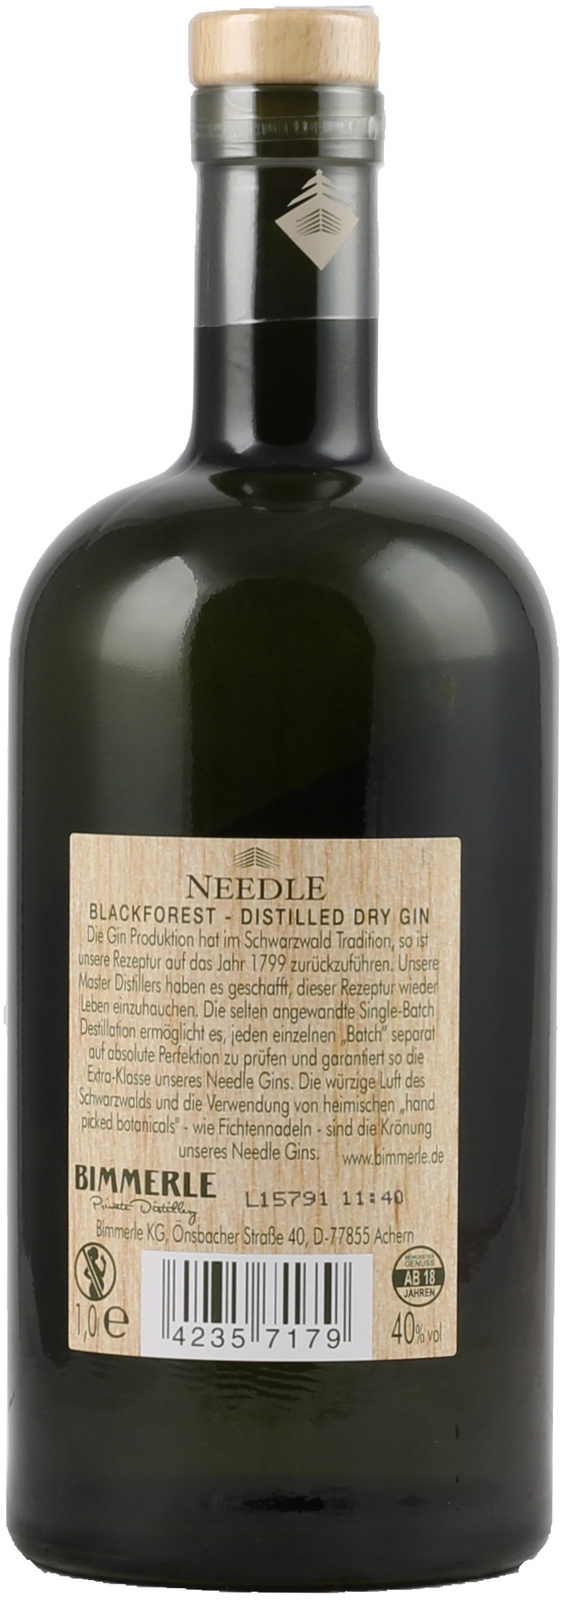 Needle Black Forest Dry Gin hier im Onlineshop